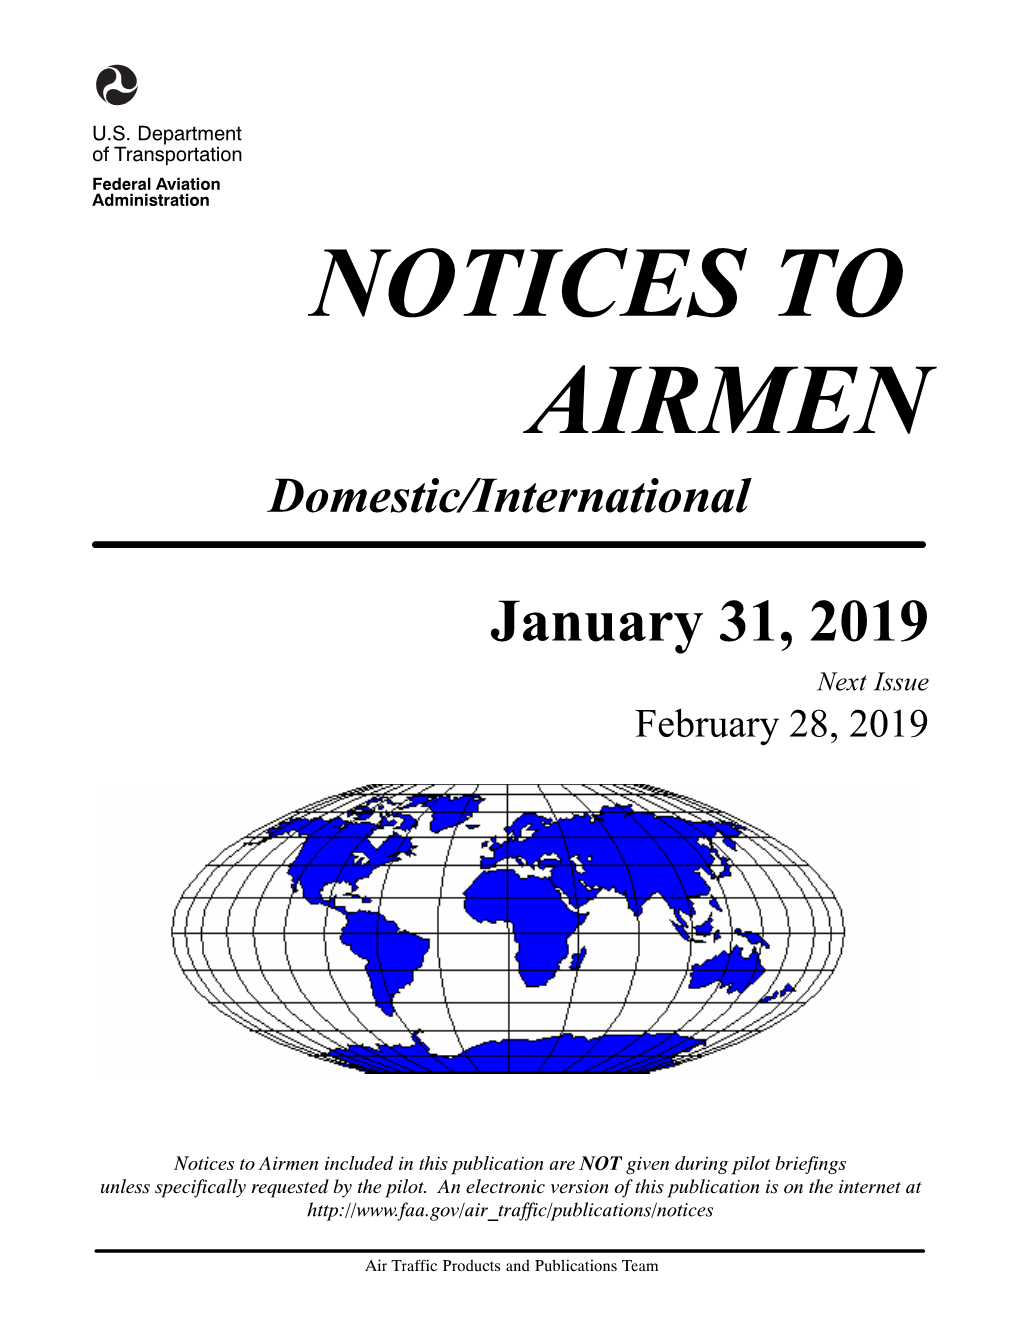 January 31, 2019 Notices to Airmen